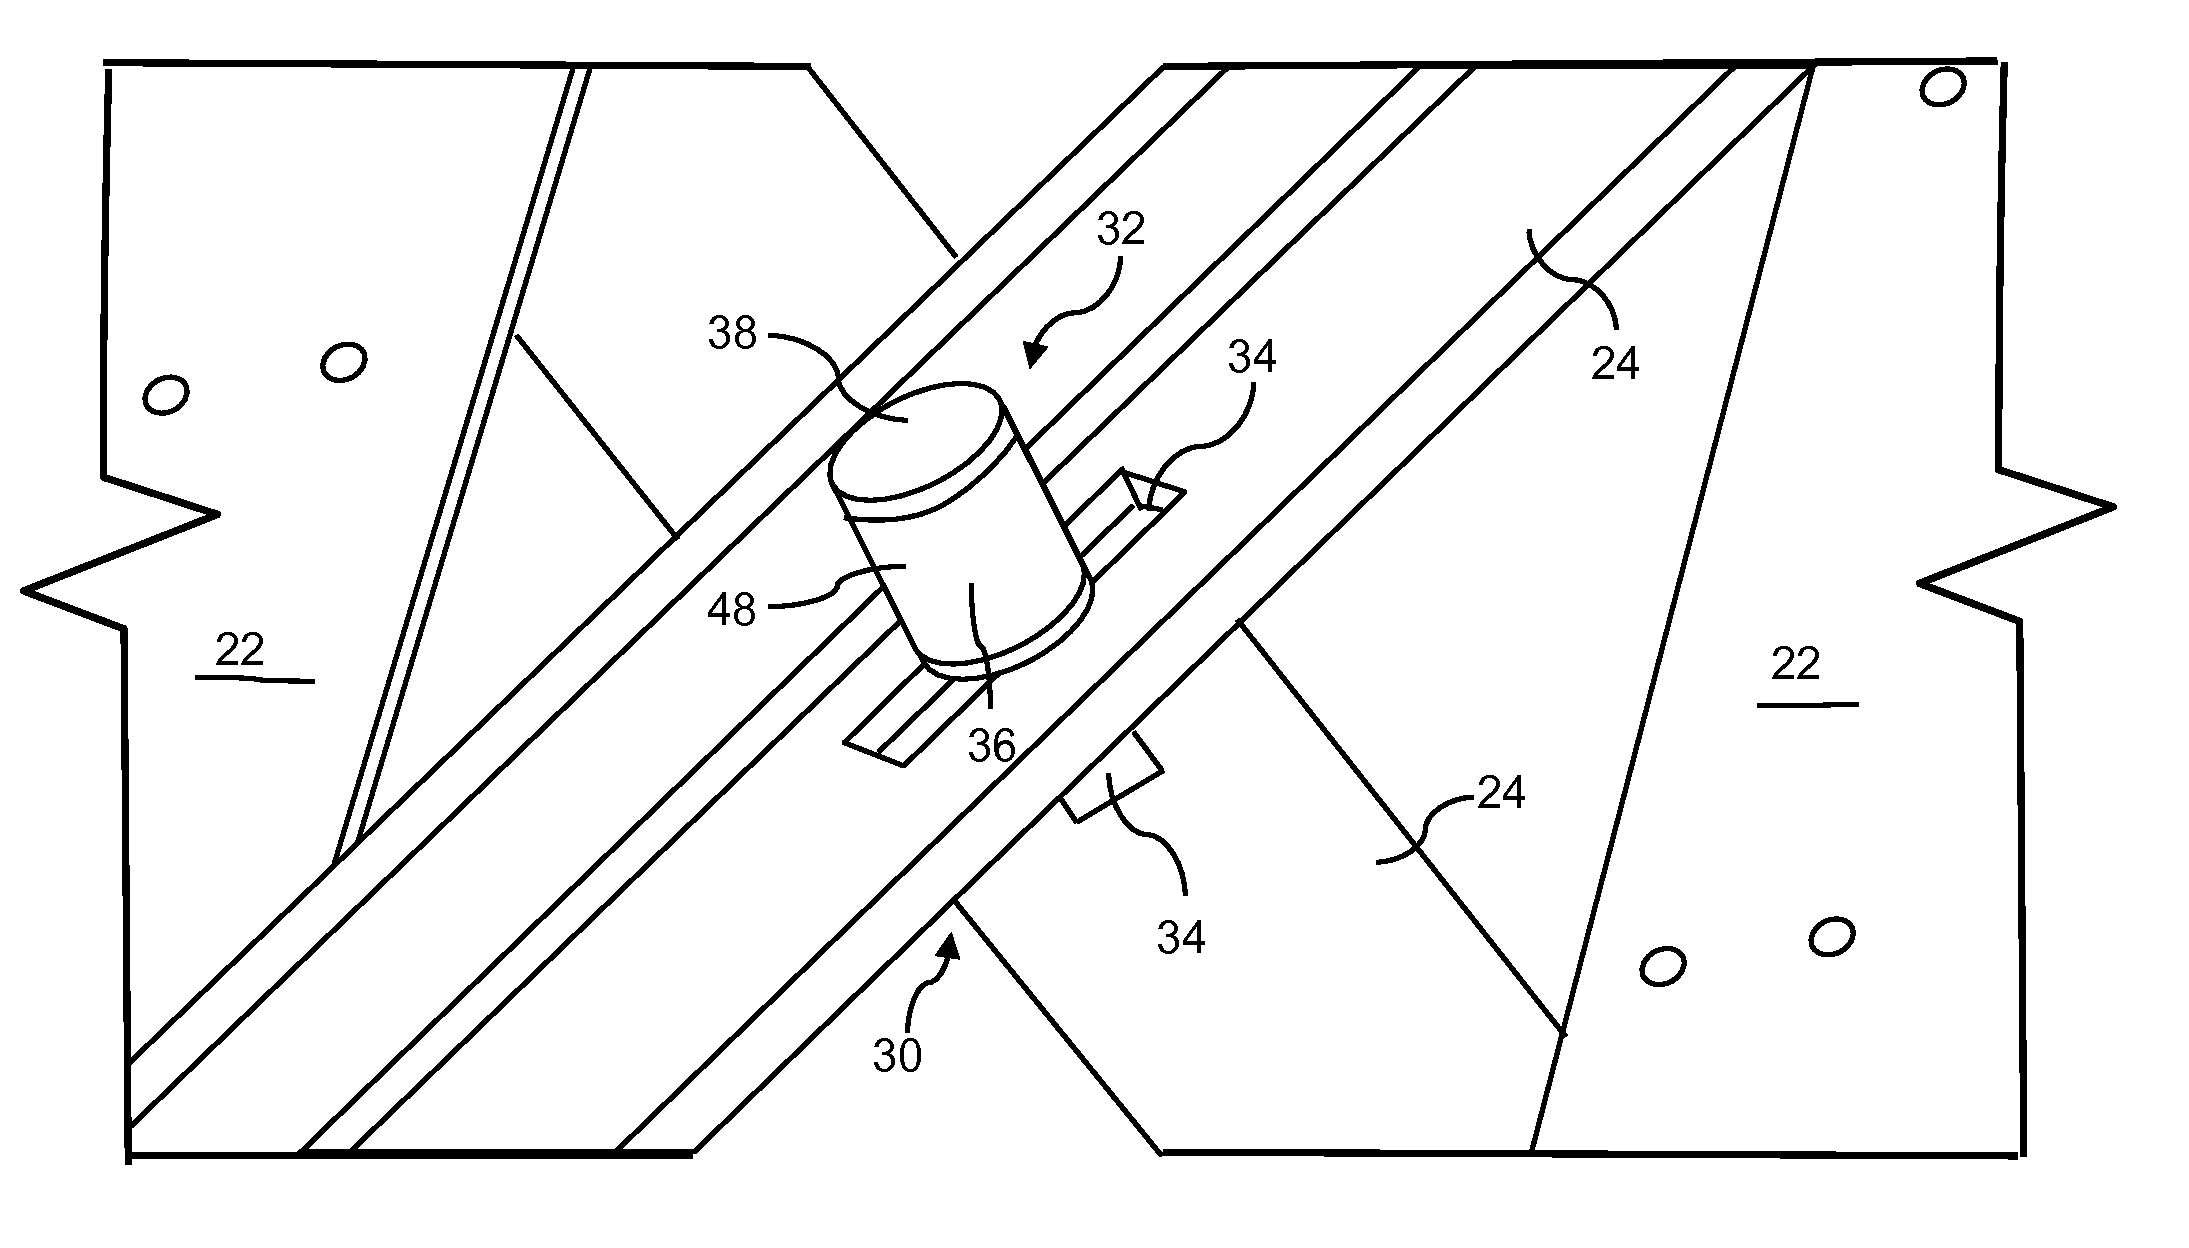 Friction damping bolt connection for a wind tower lattice structure